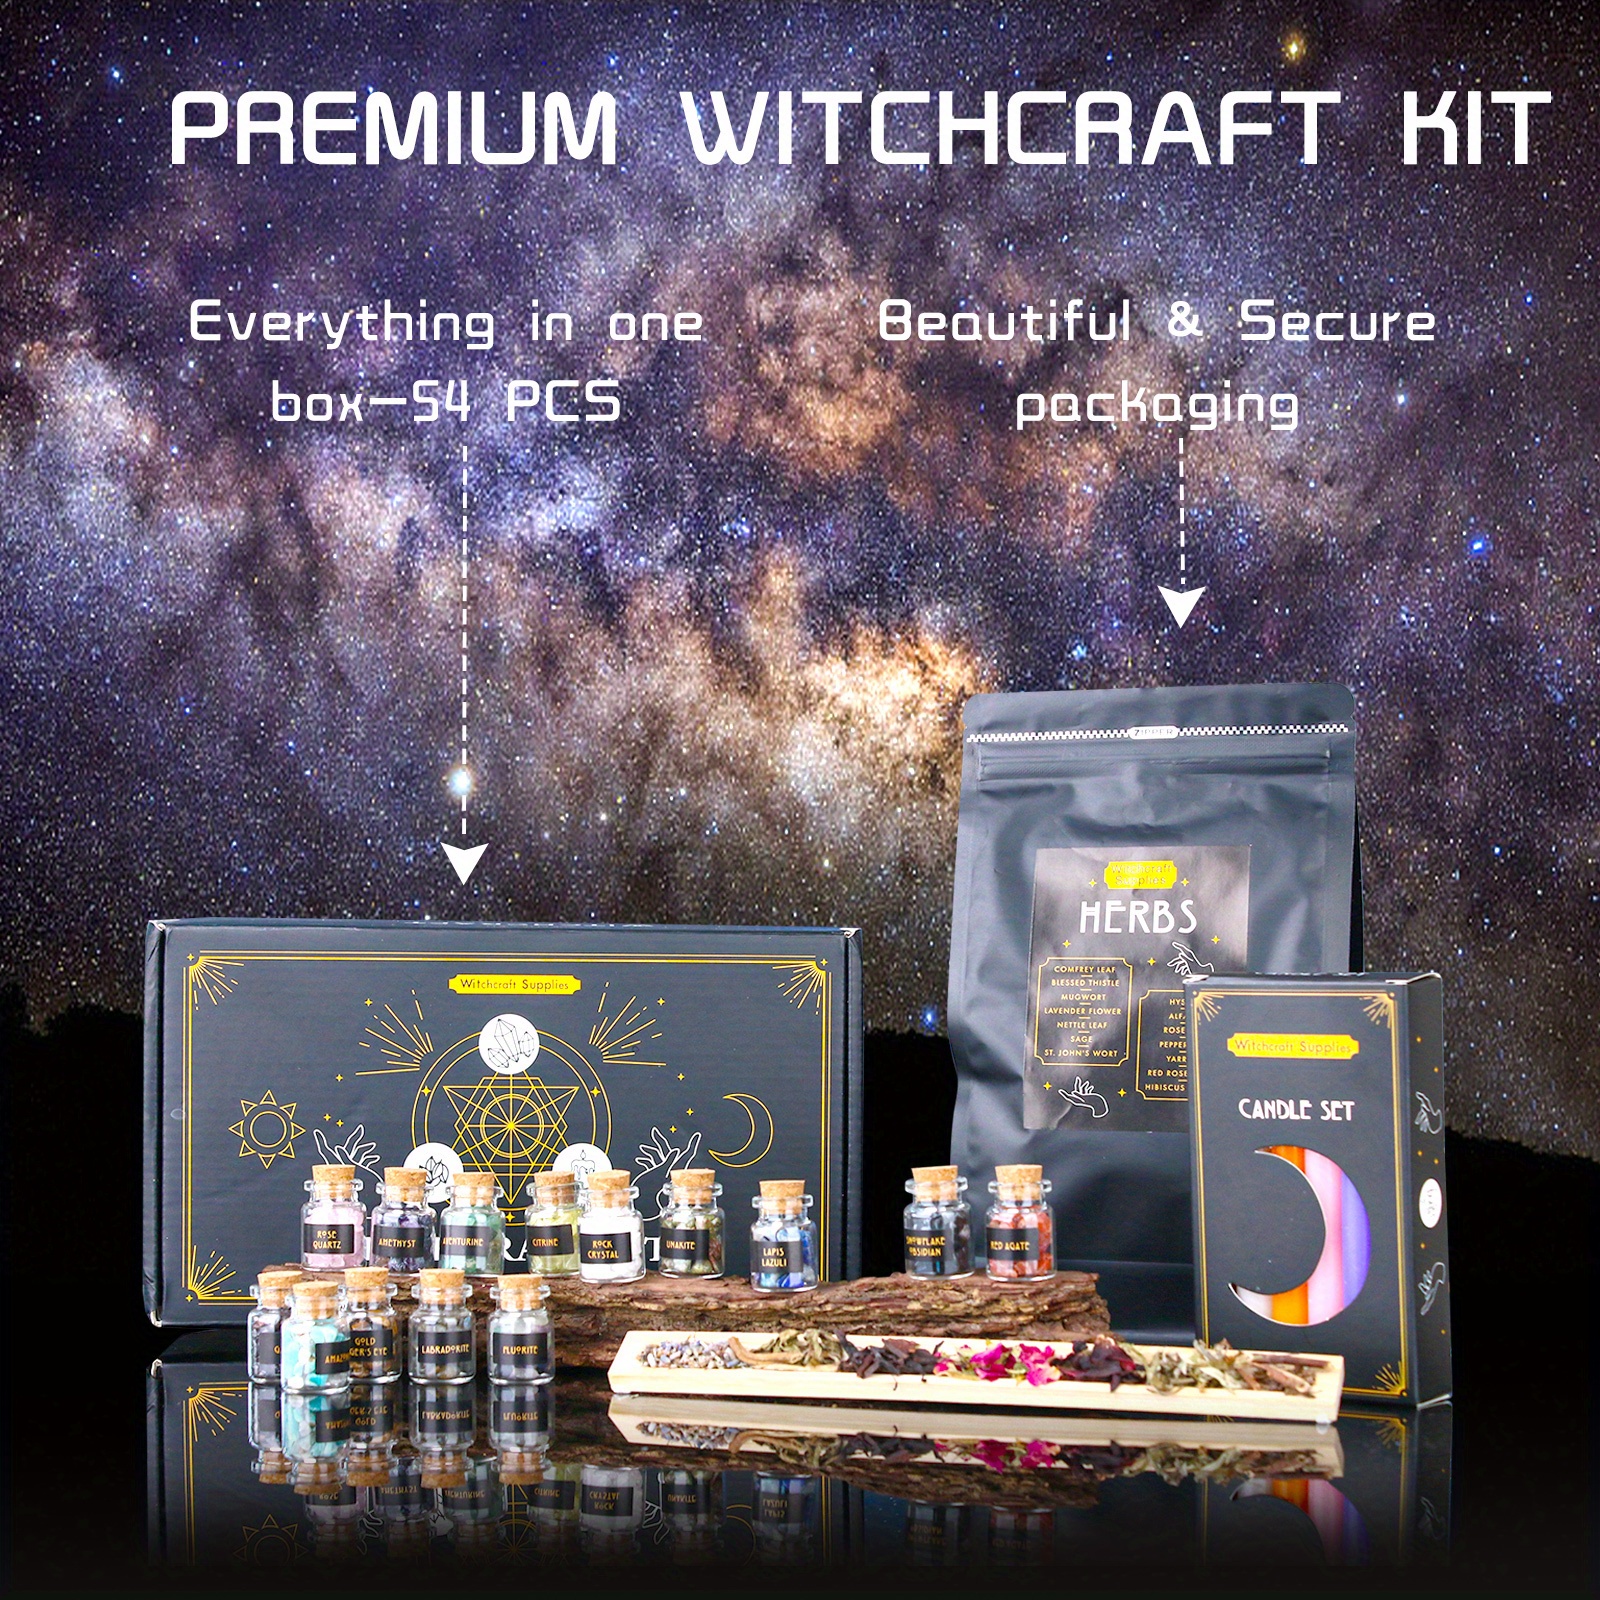  Witch kit Wiccan Altar kit Beginner Witchcraft kit for Baby  Witches Supplies : Home & Kitchen